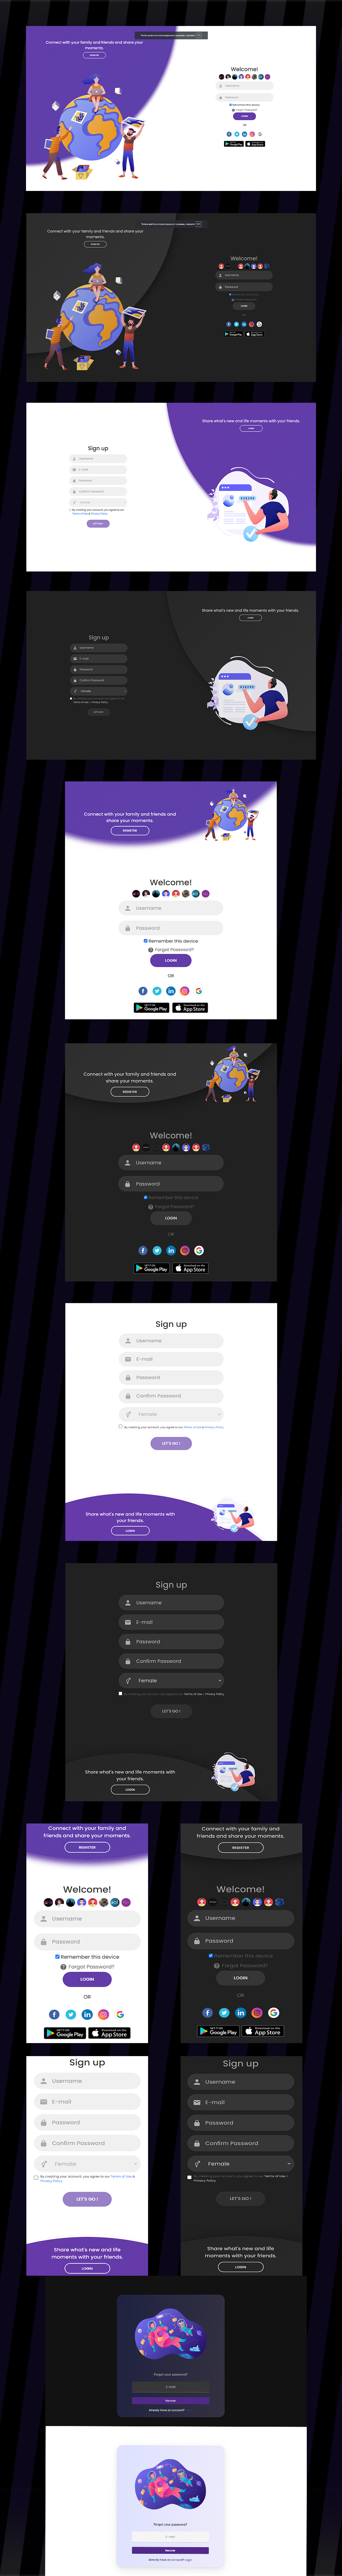 Premium Welcome Page for WoWonder